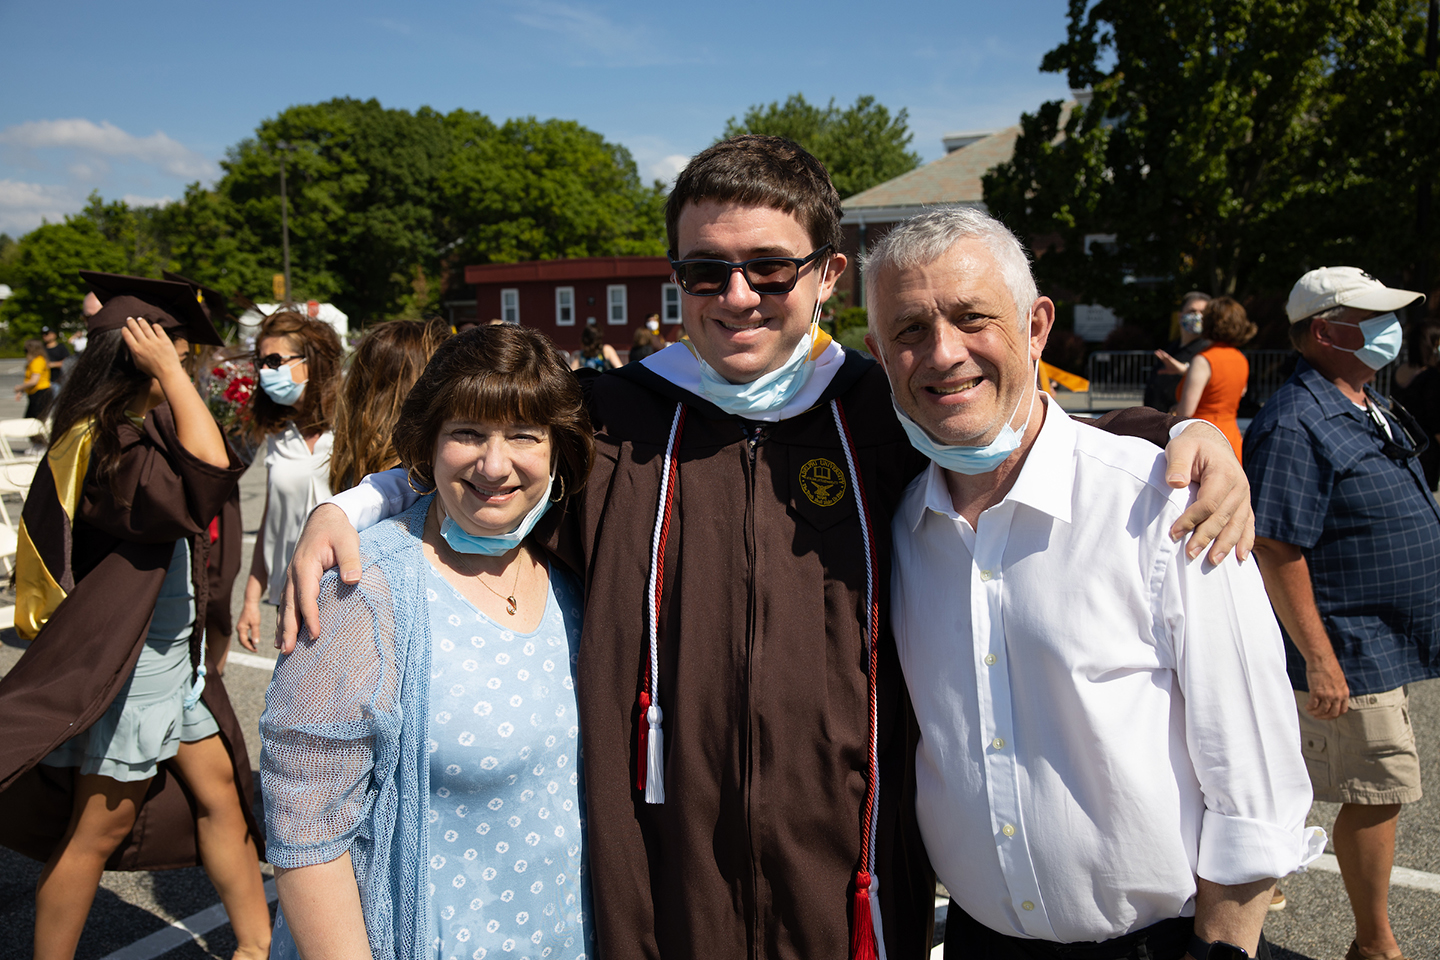 Graduate poses with parents for picture.